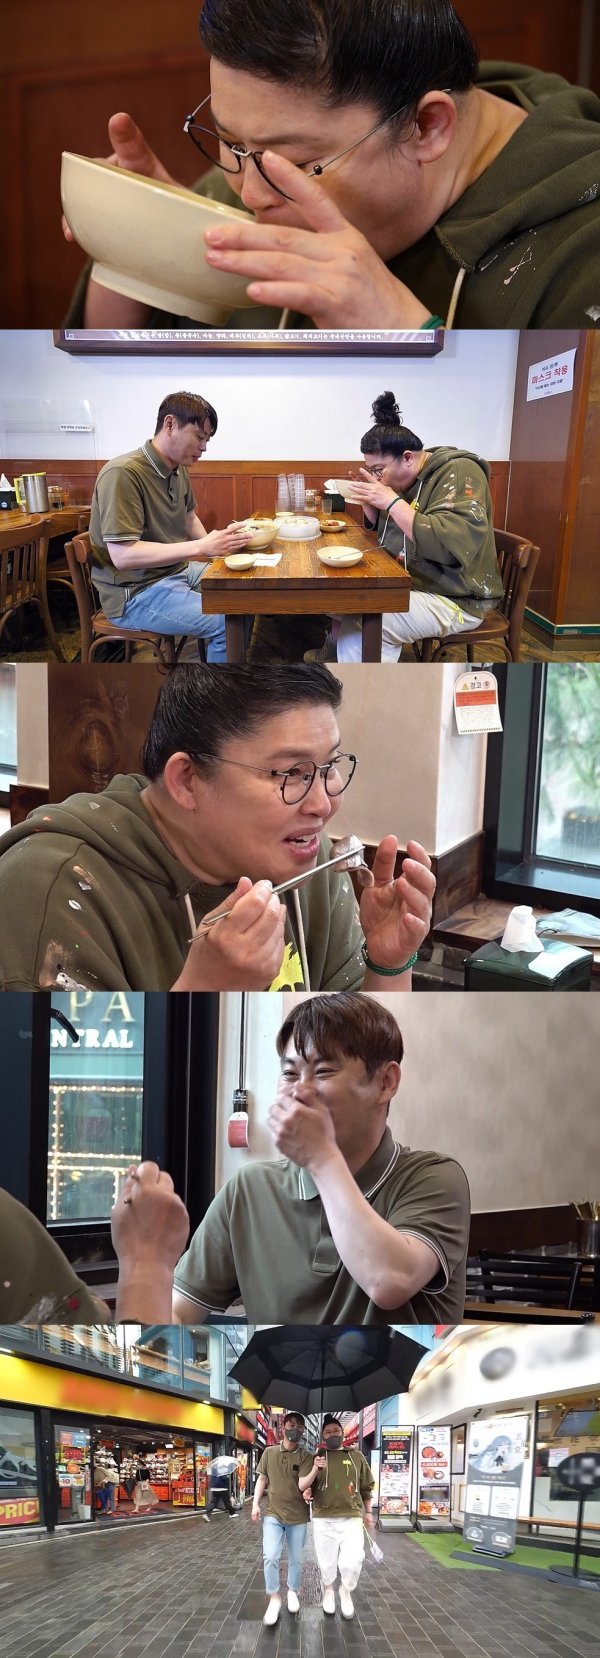 MBC Point of Omniscient Interfere (planned by Park Jung-gyu / directed by Noshi Yong, Chae Hyun-suk / hereinafter Point of Omniscient Interfere) will be broadcast on June 5th, and Lee Young-jas Myeong-dong Mukbang Road will be drawn.On this day, Lee Young-ja heads to Myeong-dong with the manager Song, where Lee Young-jas college memories were full.Lee Young-ja surprises the Good Restaurant list during school days.Lee Young-jas Myong-dong Good Restaurant list, which has never been released anywhere, warms up the attention of viewers.Lee Young-ja and Song are looking for Lee Young-jas life good restaurant among the Good Restaurant lists.Lee Young-ja and many good restaurants have been in charge of the song, but on this day, the production team is surprised by the reaction of the past.Song is thrilled by the amazing taste of the storm as soon as he eats Good Restaurants Food.Meanwhile Lee Young-ja suddenly pours tears into the studio while eating food.There was a unique story of Lee Young-ja in the good restaurant. I am curious about what Lee Young-ja is tearing down.Lee Young-ja and Song are following the steps to another good restaurant, saying, Lets go for dessert.Eating food there was Lee Young-jas wish during his school days.Lee Young-ja is enjoying food and is attracted to the joy of I am a person who eats this. Song also admired it as a taste of confusion.What is the Myong-dong Good Restaurant list released by Lee Young-ja?Lee Young-jas Mukbang tour, which will stimulate viewers salivary glands, can be seen at MBC Point of Omniscient Interfere 156th broadcast on Saturday, June 5th at 11:10 pm.Photo: MBCs Point of Omniscient Interfere